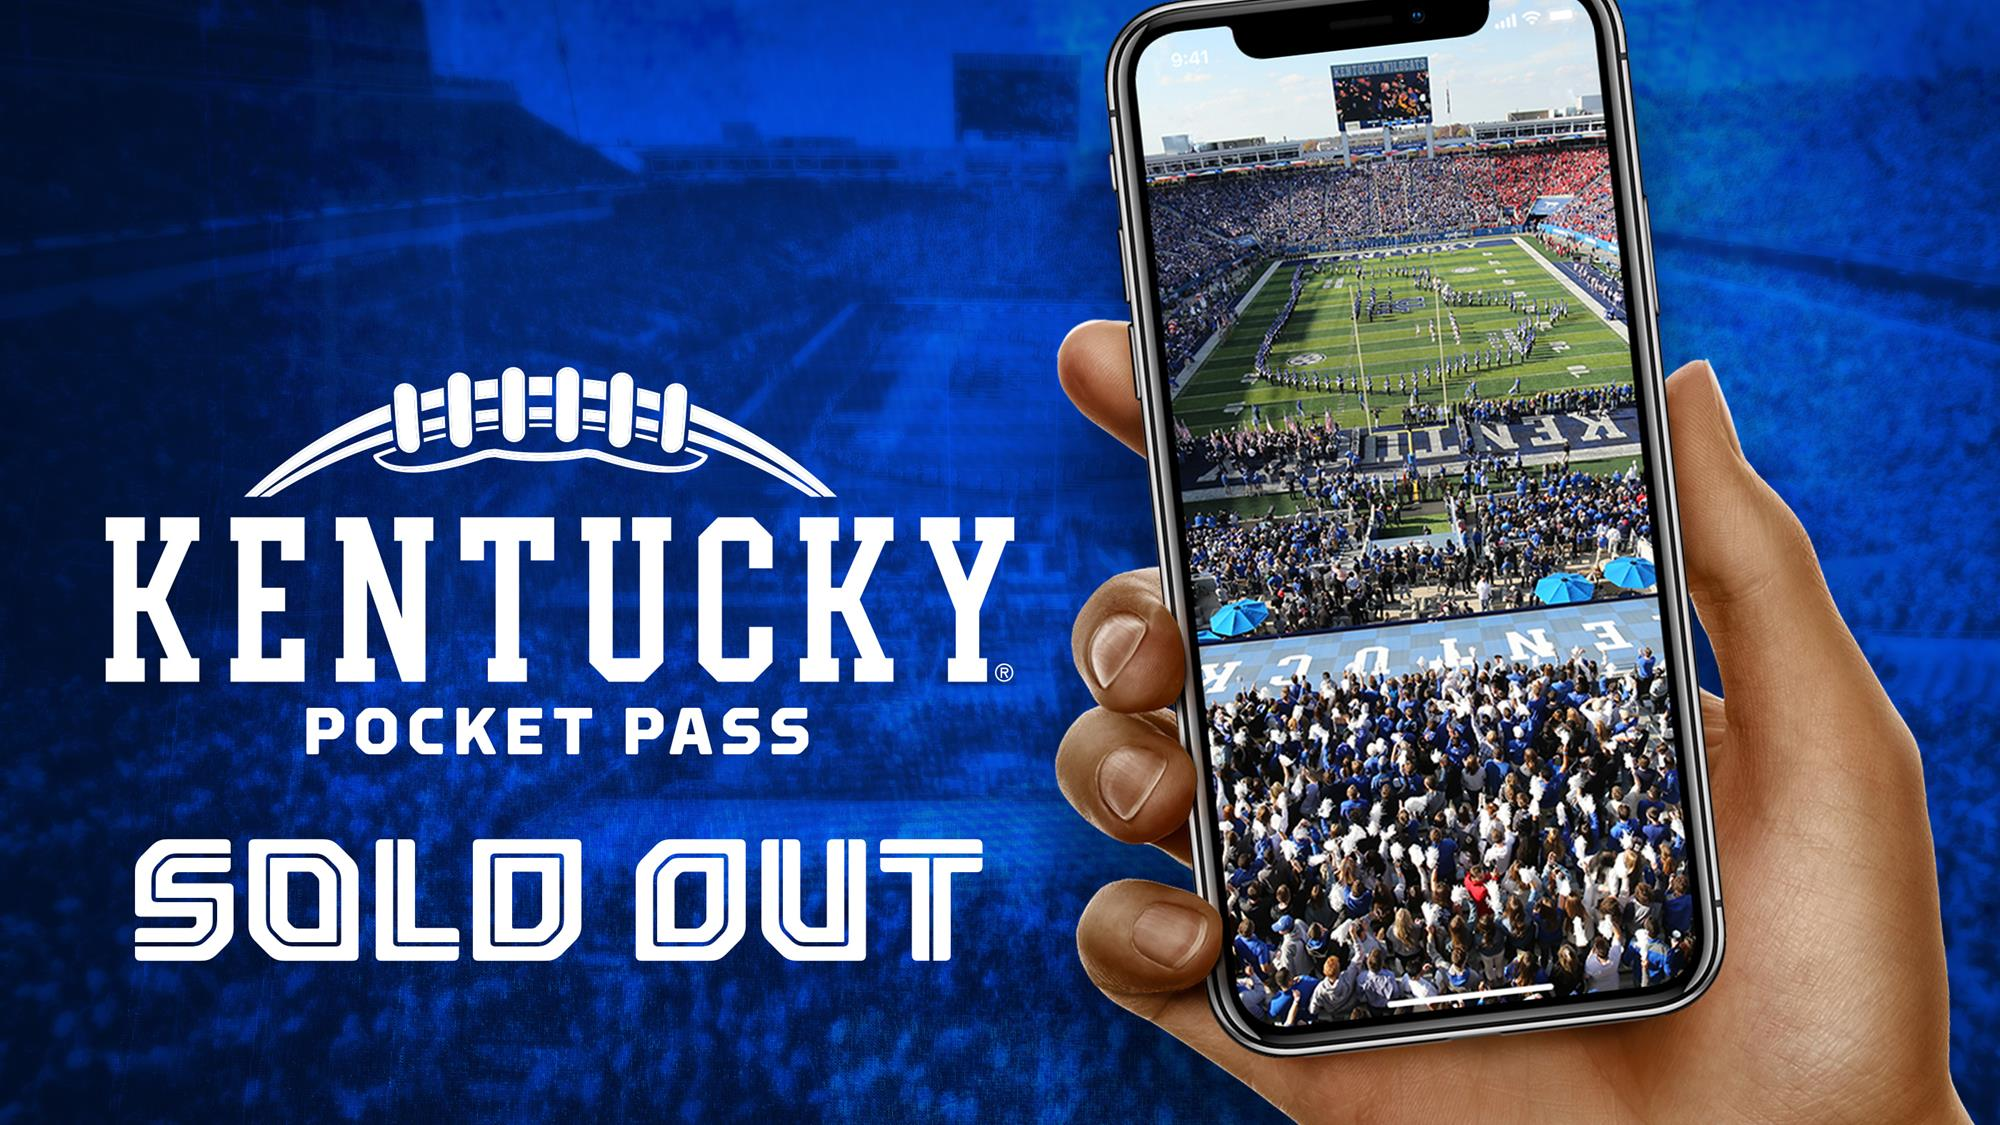 Kentucky Football Pocket Passes Sold Out